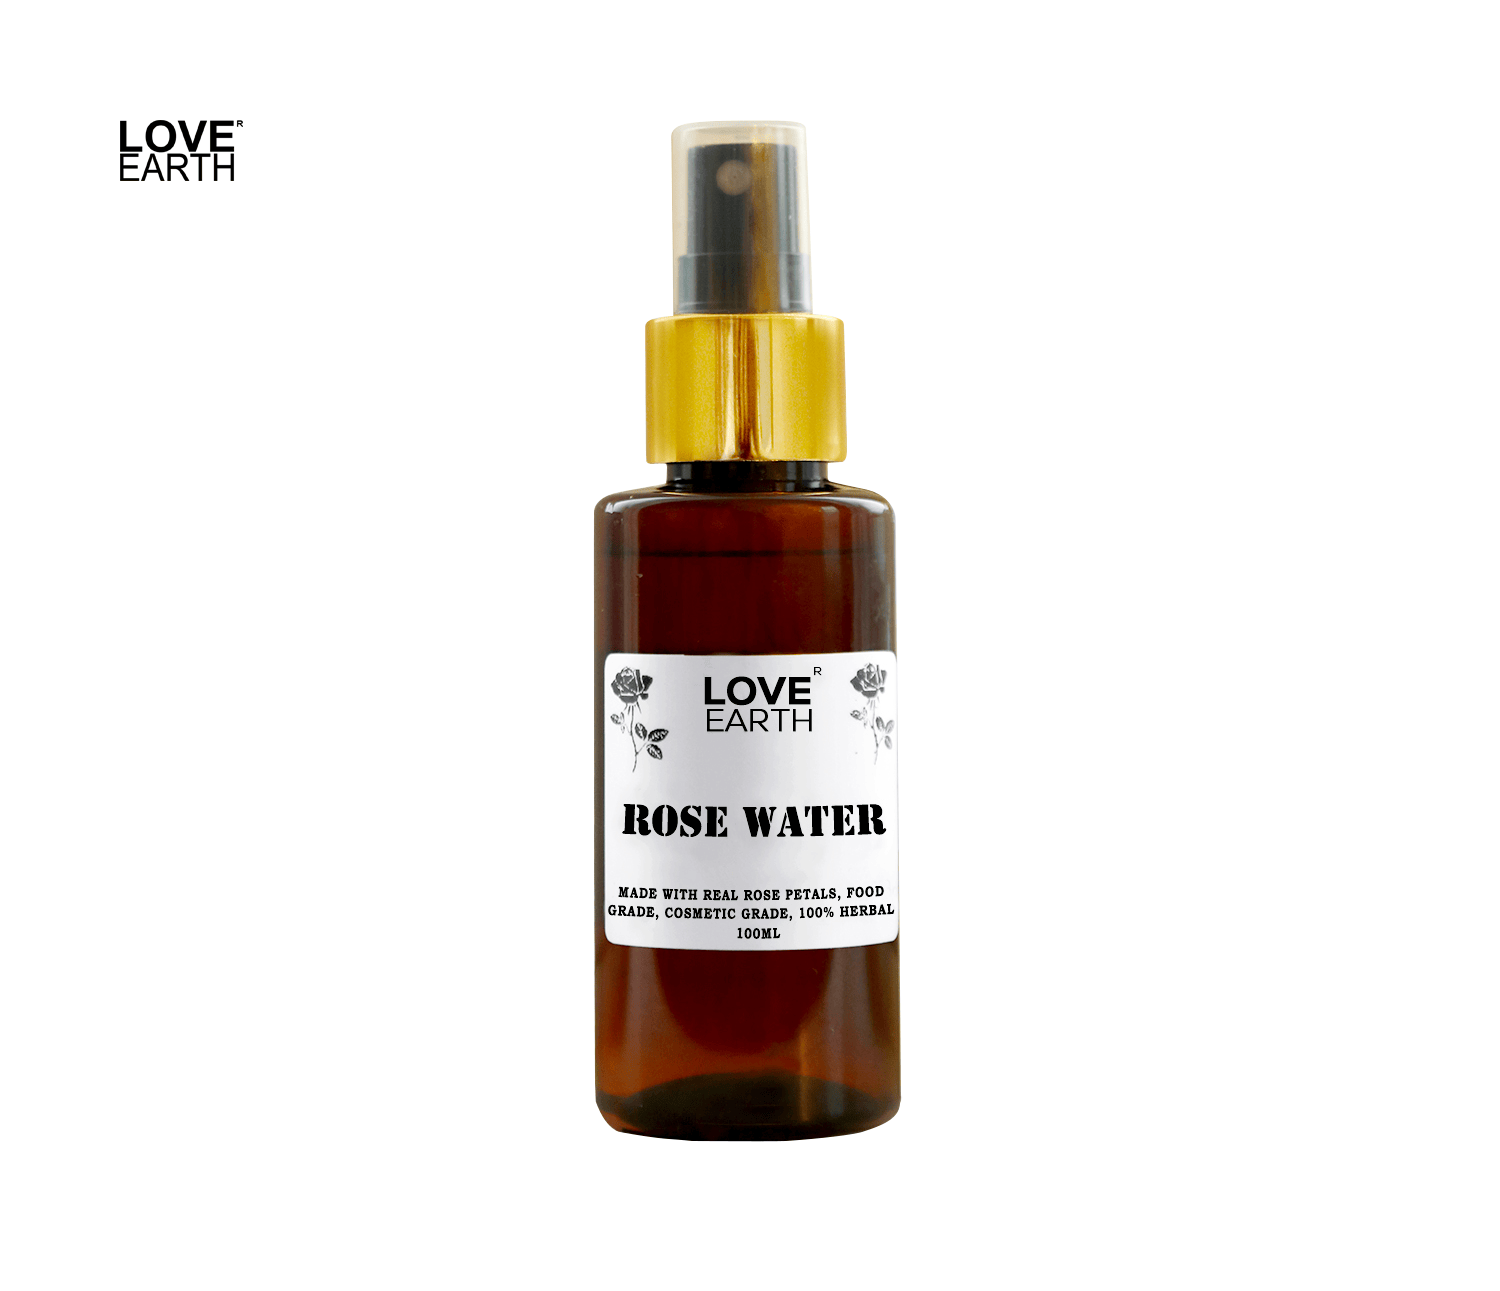 LOVE EARTH | Love Earth Rose Water Gulab Jal Face Mist Toner with Real Rose Petals & Extracts for Skin Hydration and Natural Glow 100ml